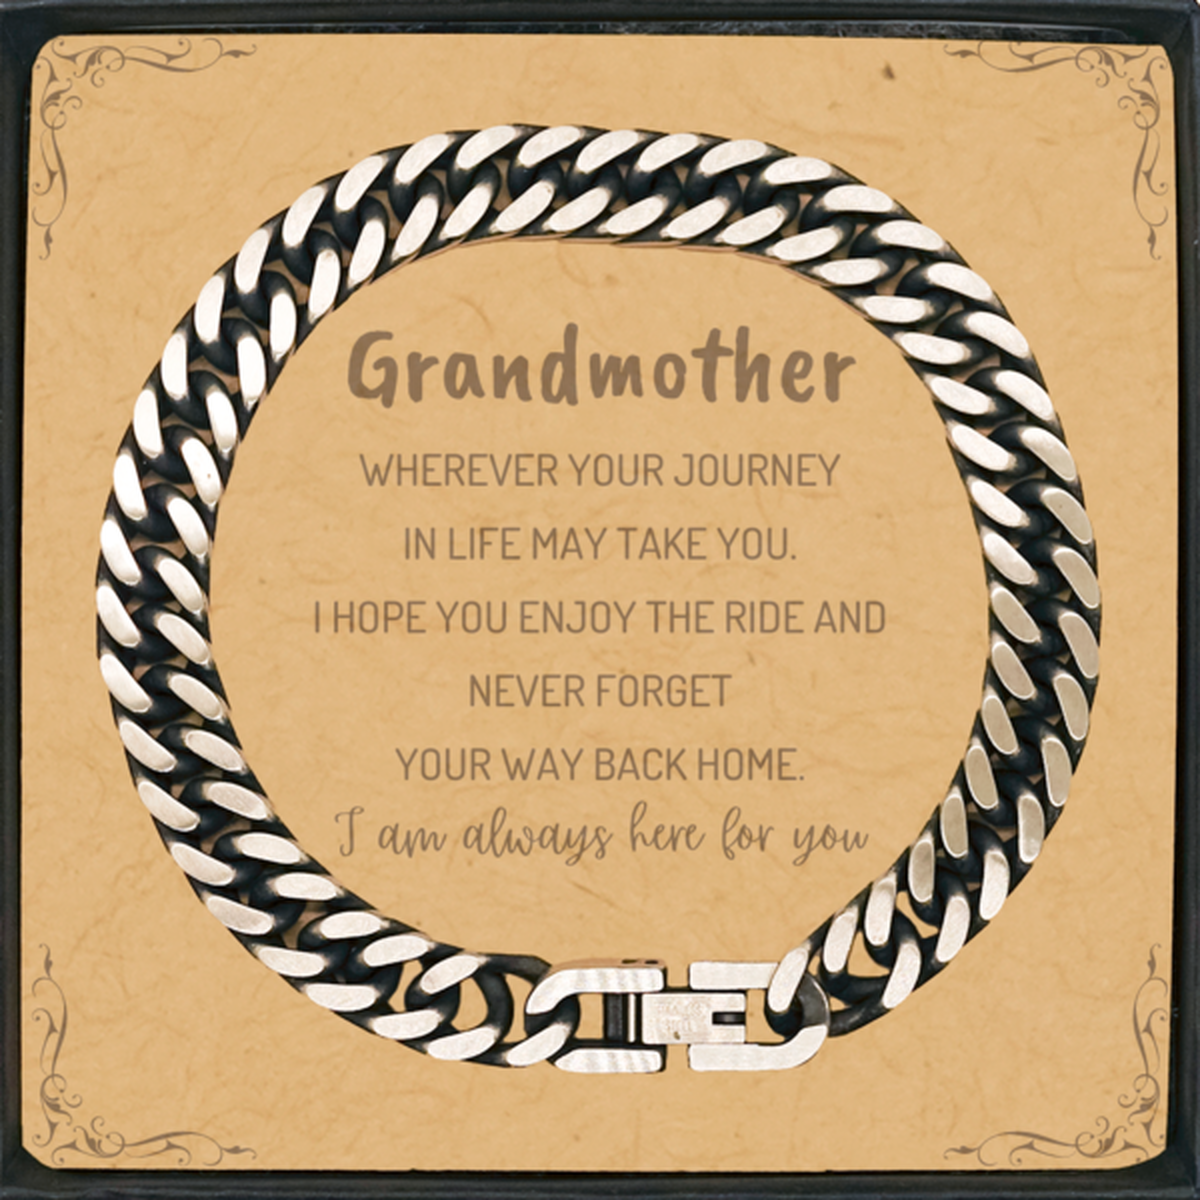 Grandmother wherever your journey in life may take you, I am always here for you Grandmother Cuban Link Chain Bracelet, Awesome Christmas Gifts For Grandmother Message Card, Grandmother Birthday Gifts for Men Women Family Loved One